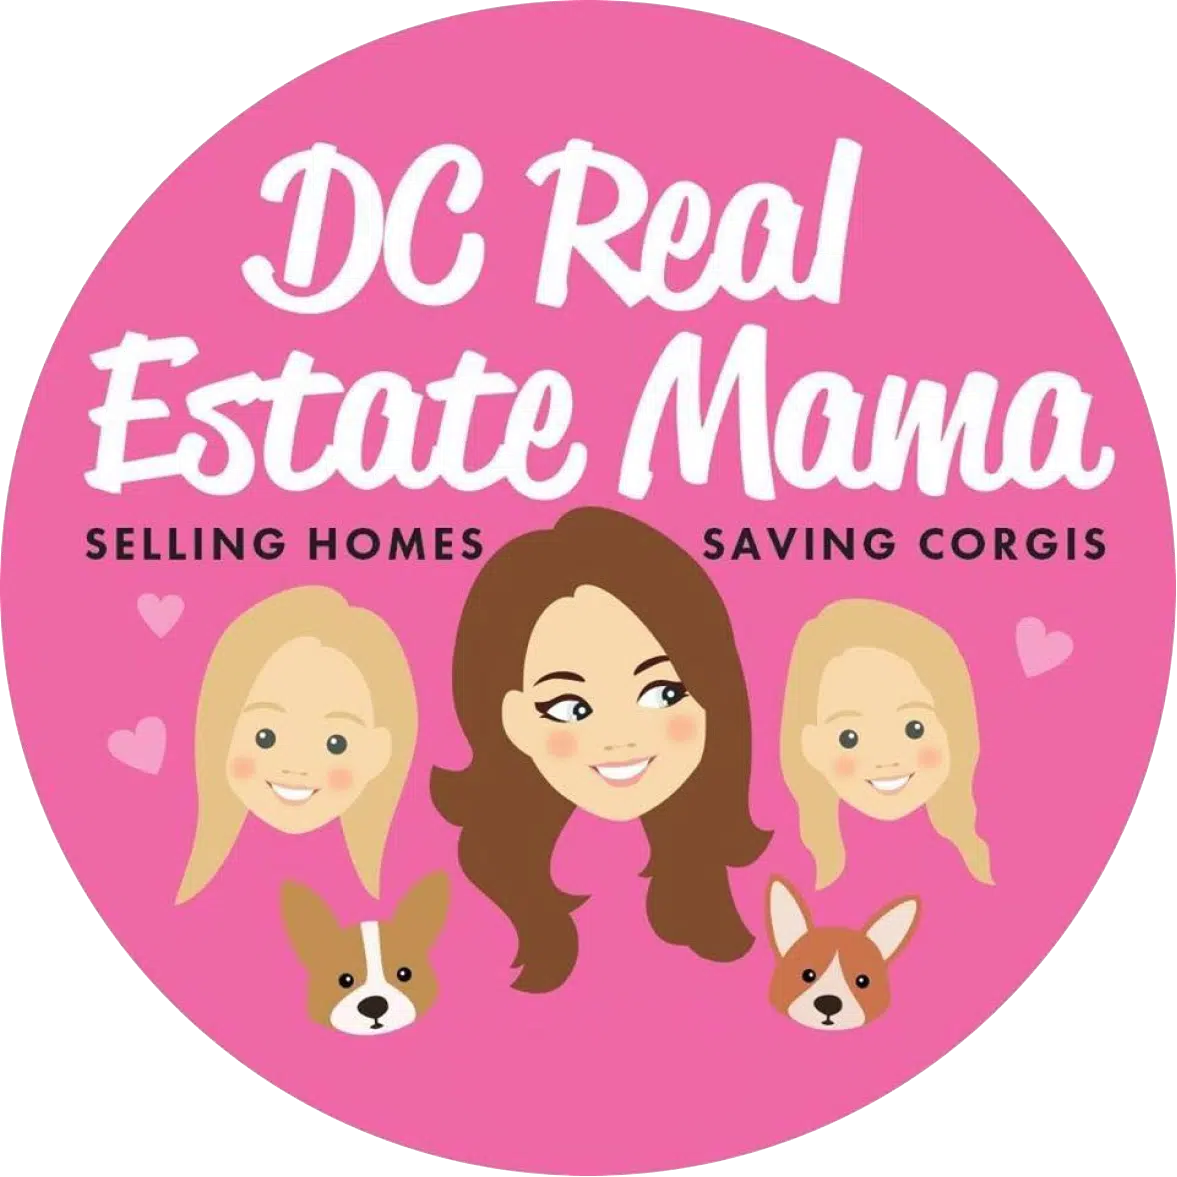 dc real estate mama today photo